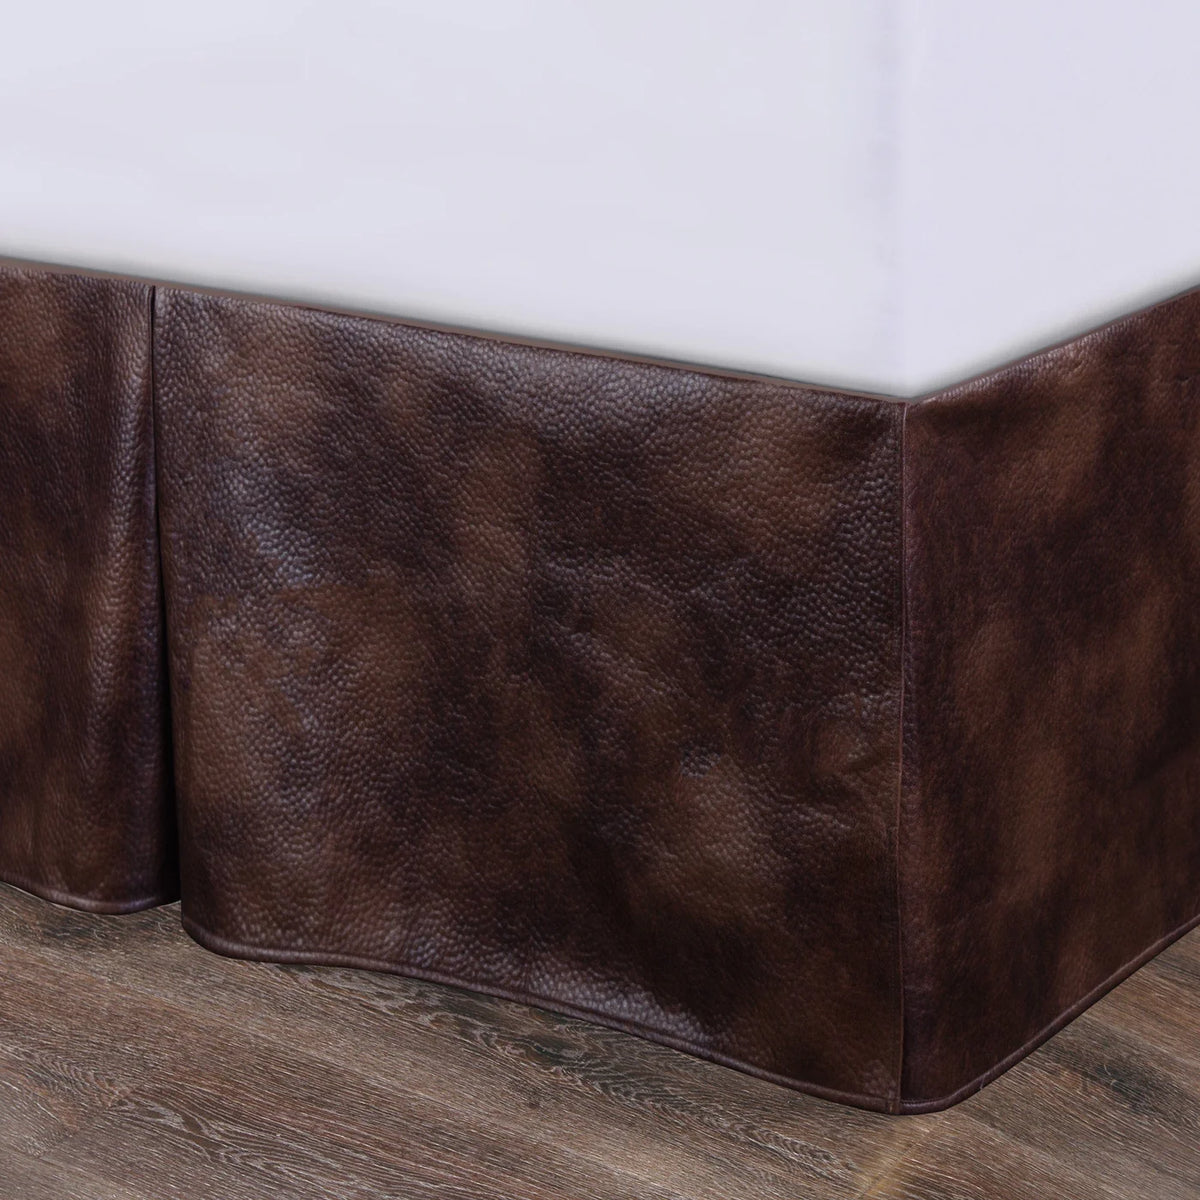 Brown Faux Leather Bed Skirt